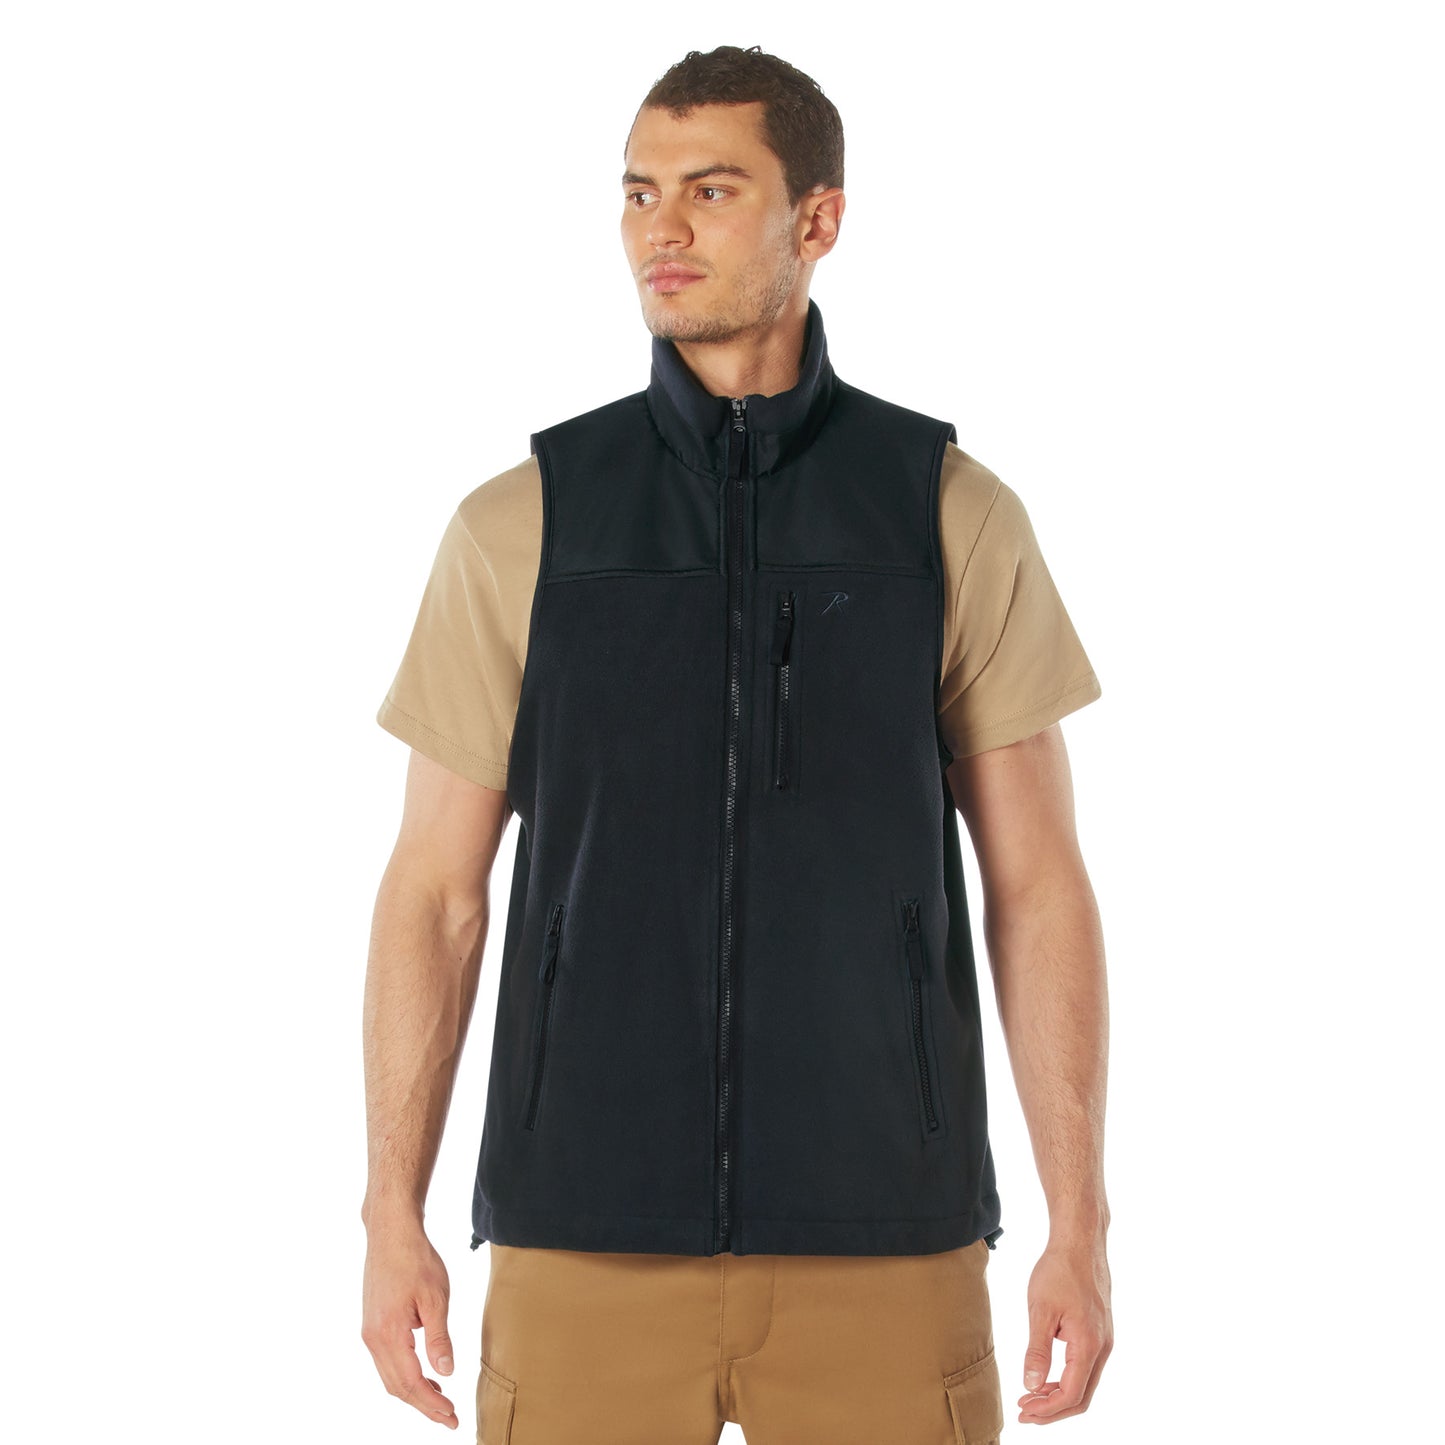 Rothco Spec Ops Tactical Vest